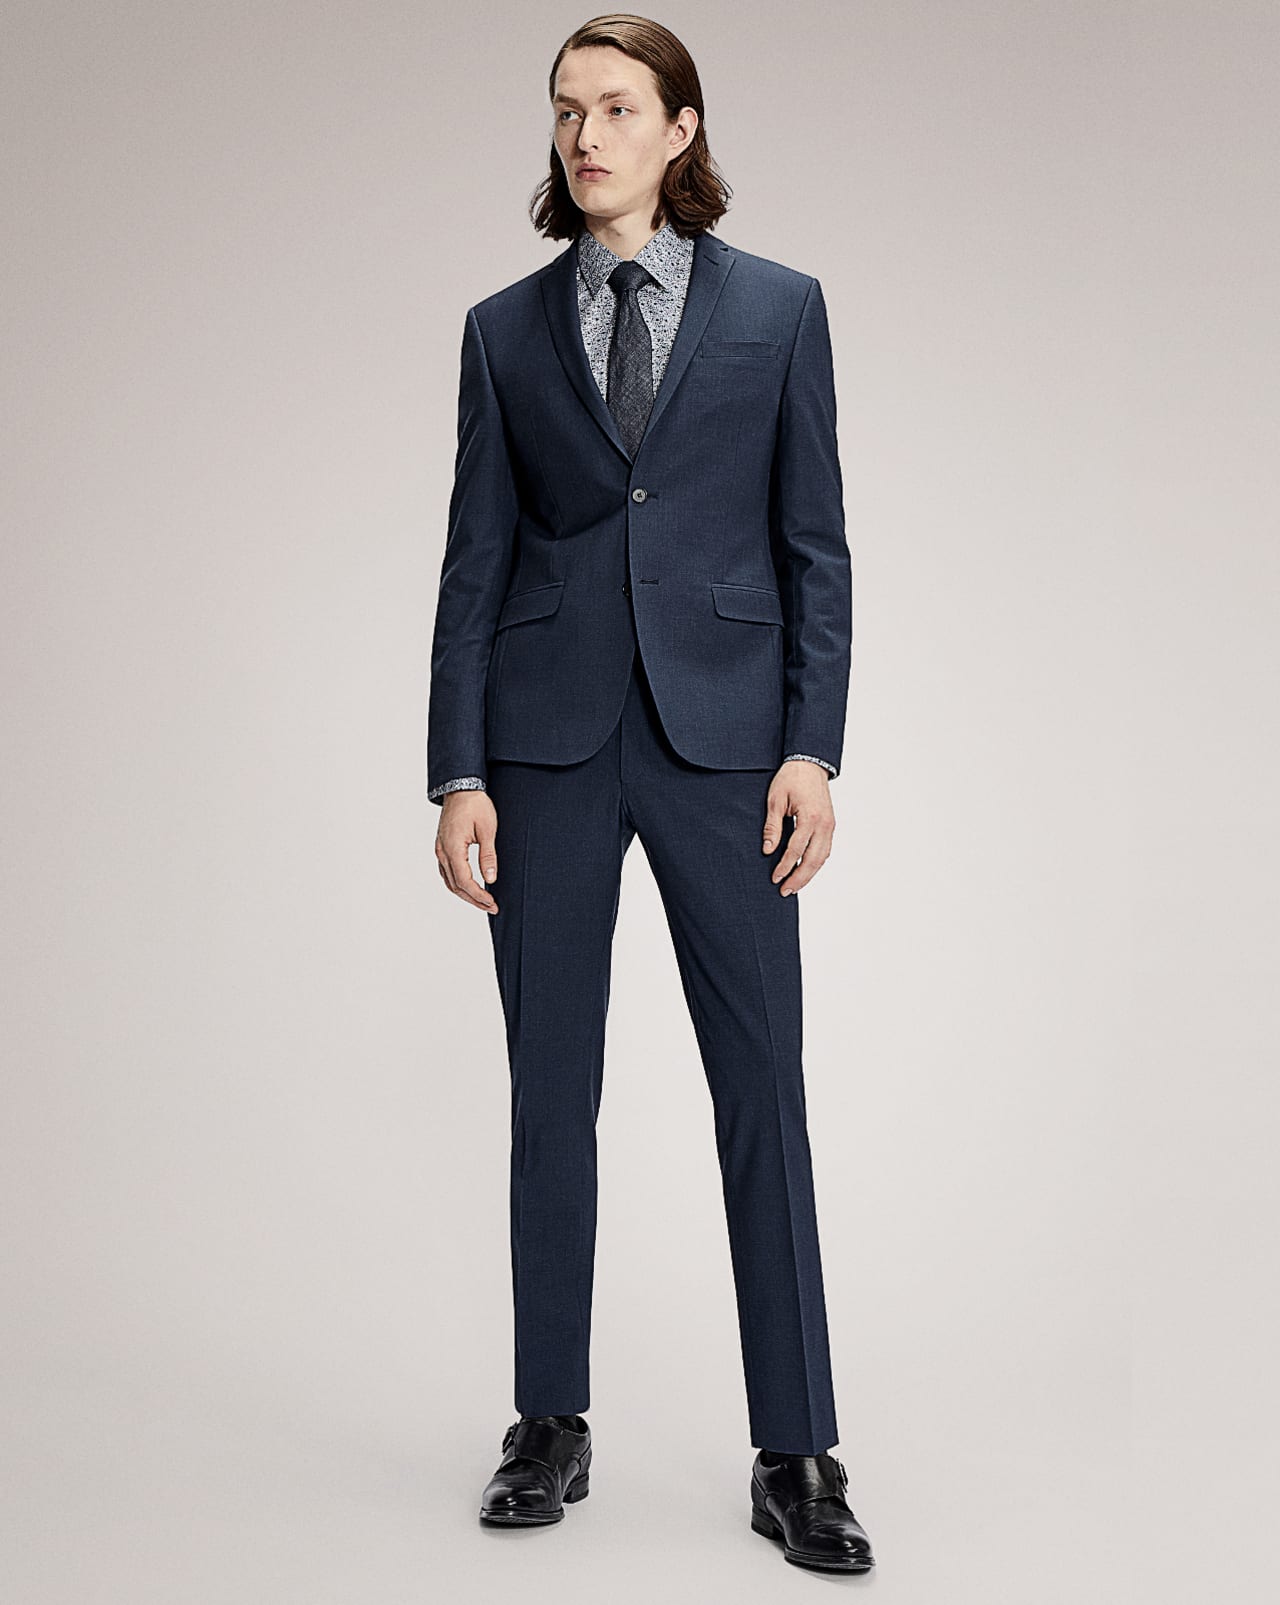 The Ideal Suit Fit - Understanding Your Measurements - Oliver Wicks